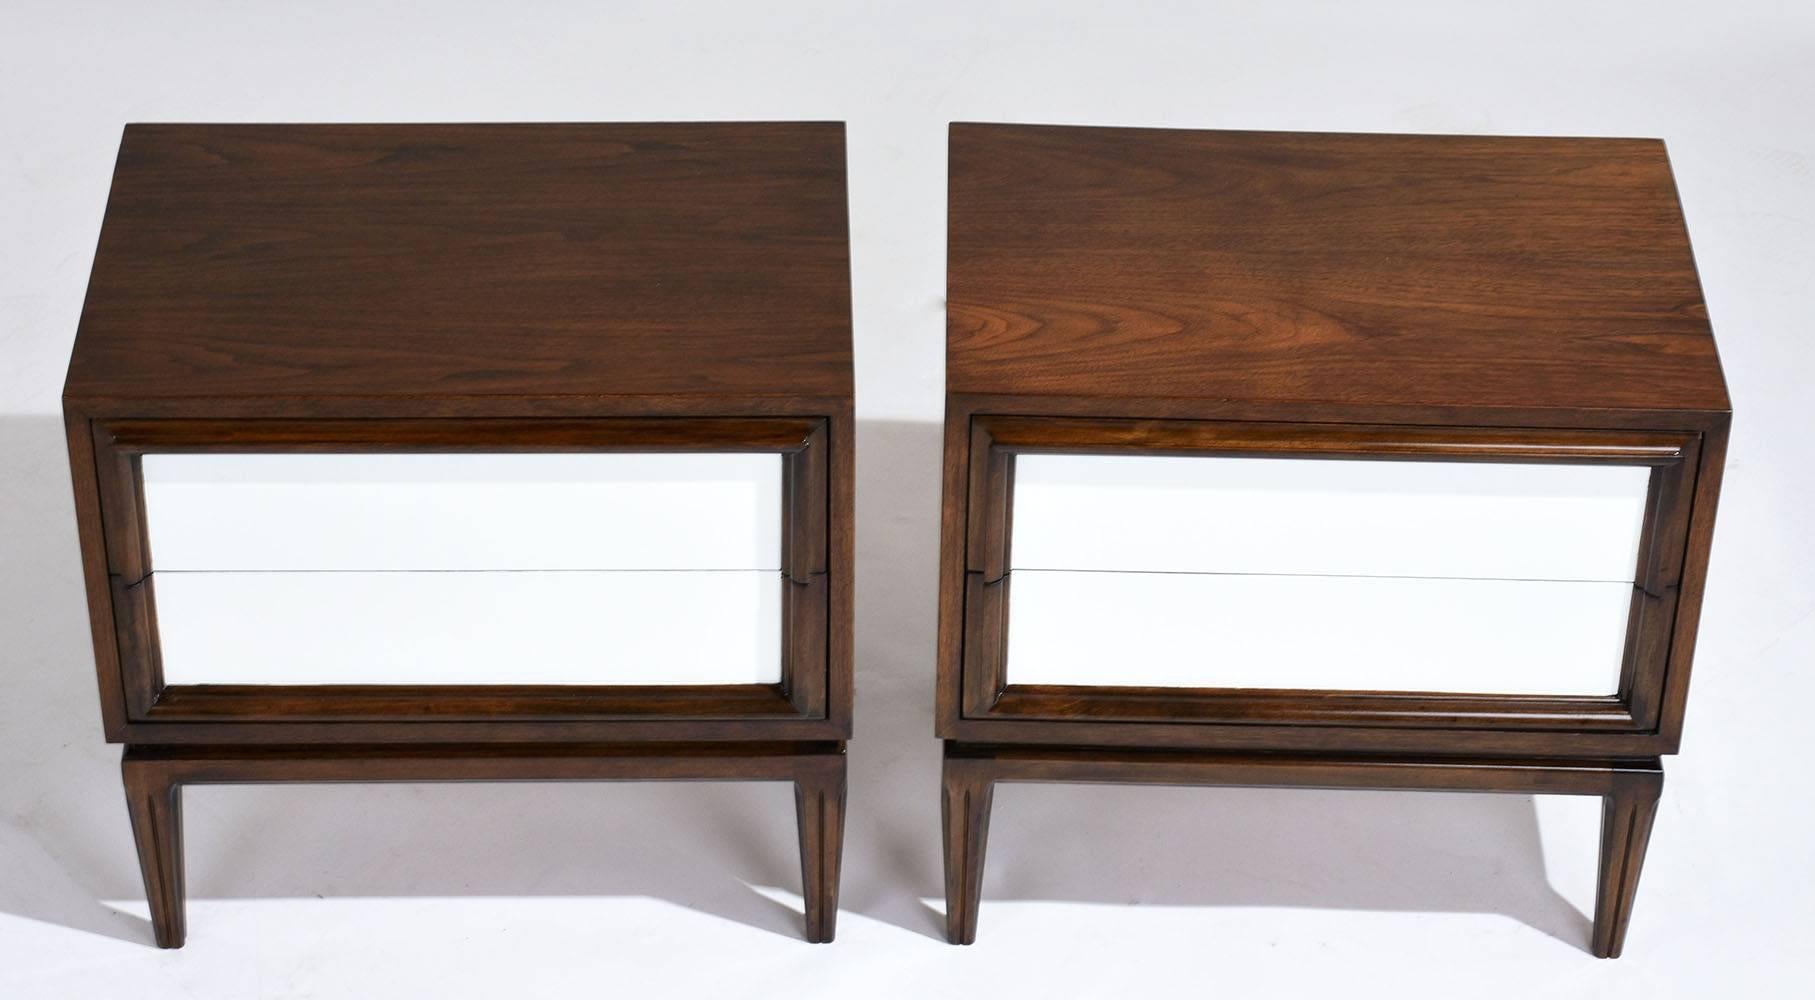 Carved Pair of Mid-Century Modern-Style Nightstands